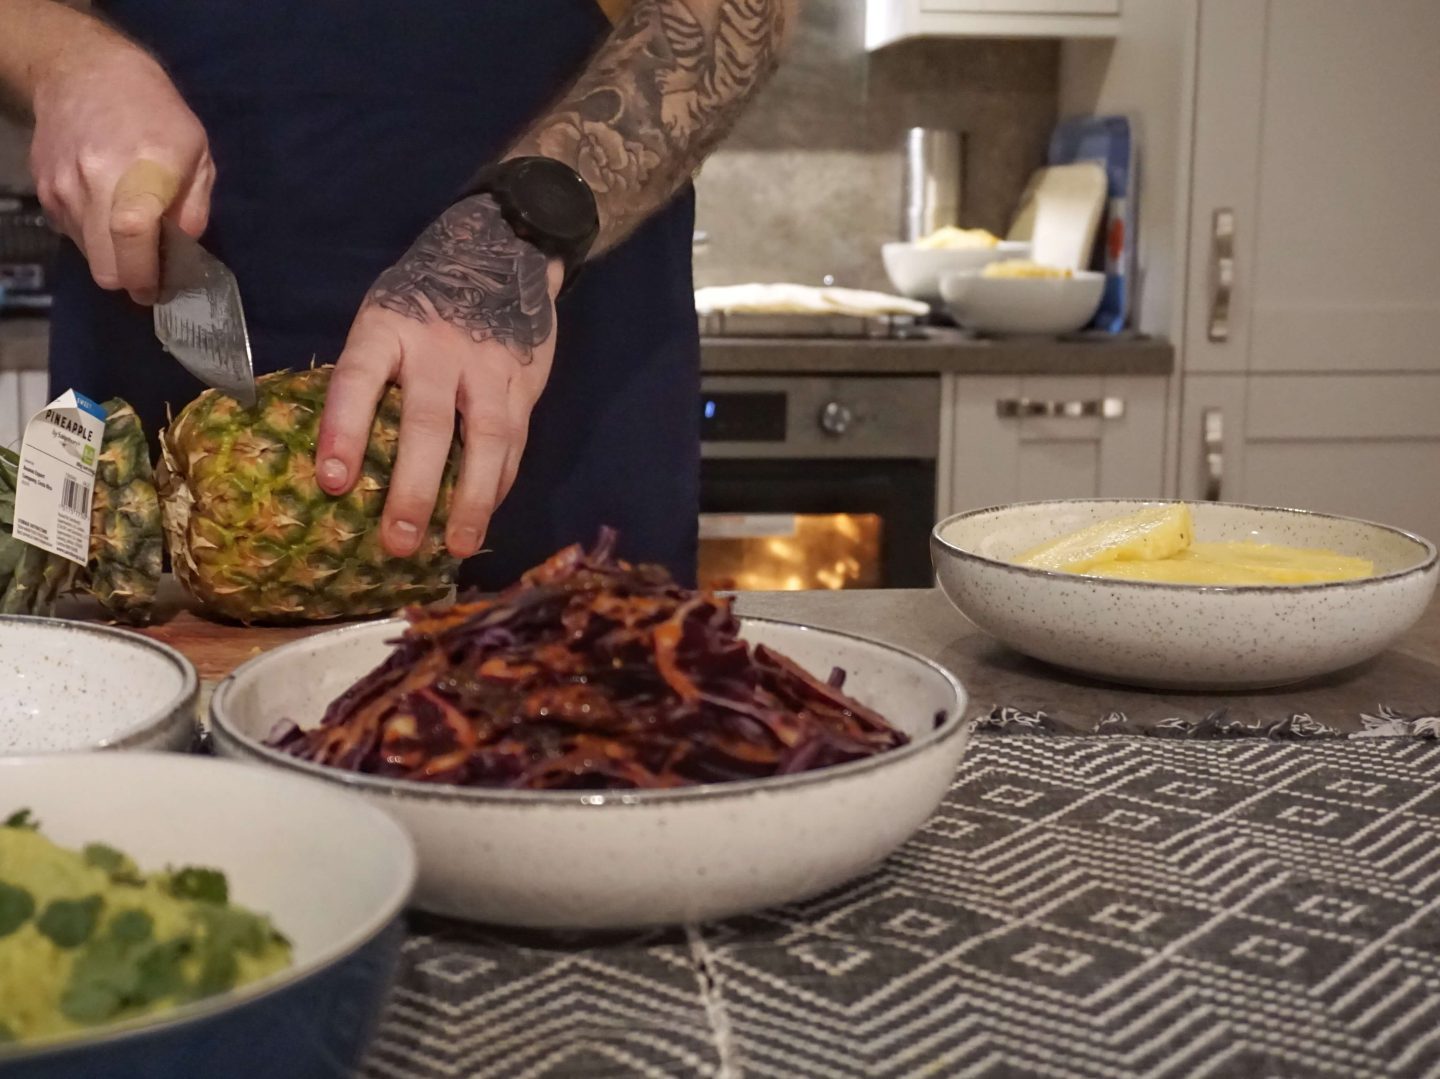 Hands of chef Dean with tattoos and a watch on left wrist he is cutting a fresh pineapple with spiced cabbage in front of him and other bowls of mexican food around